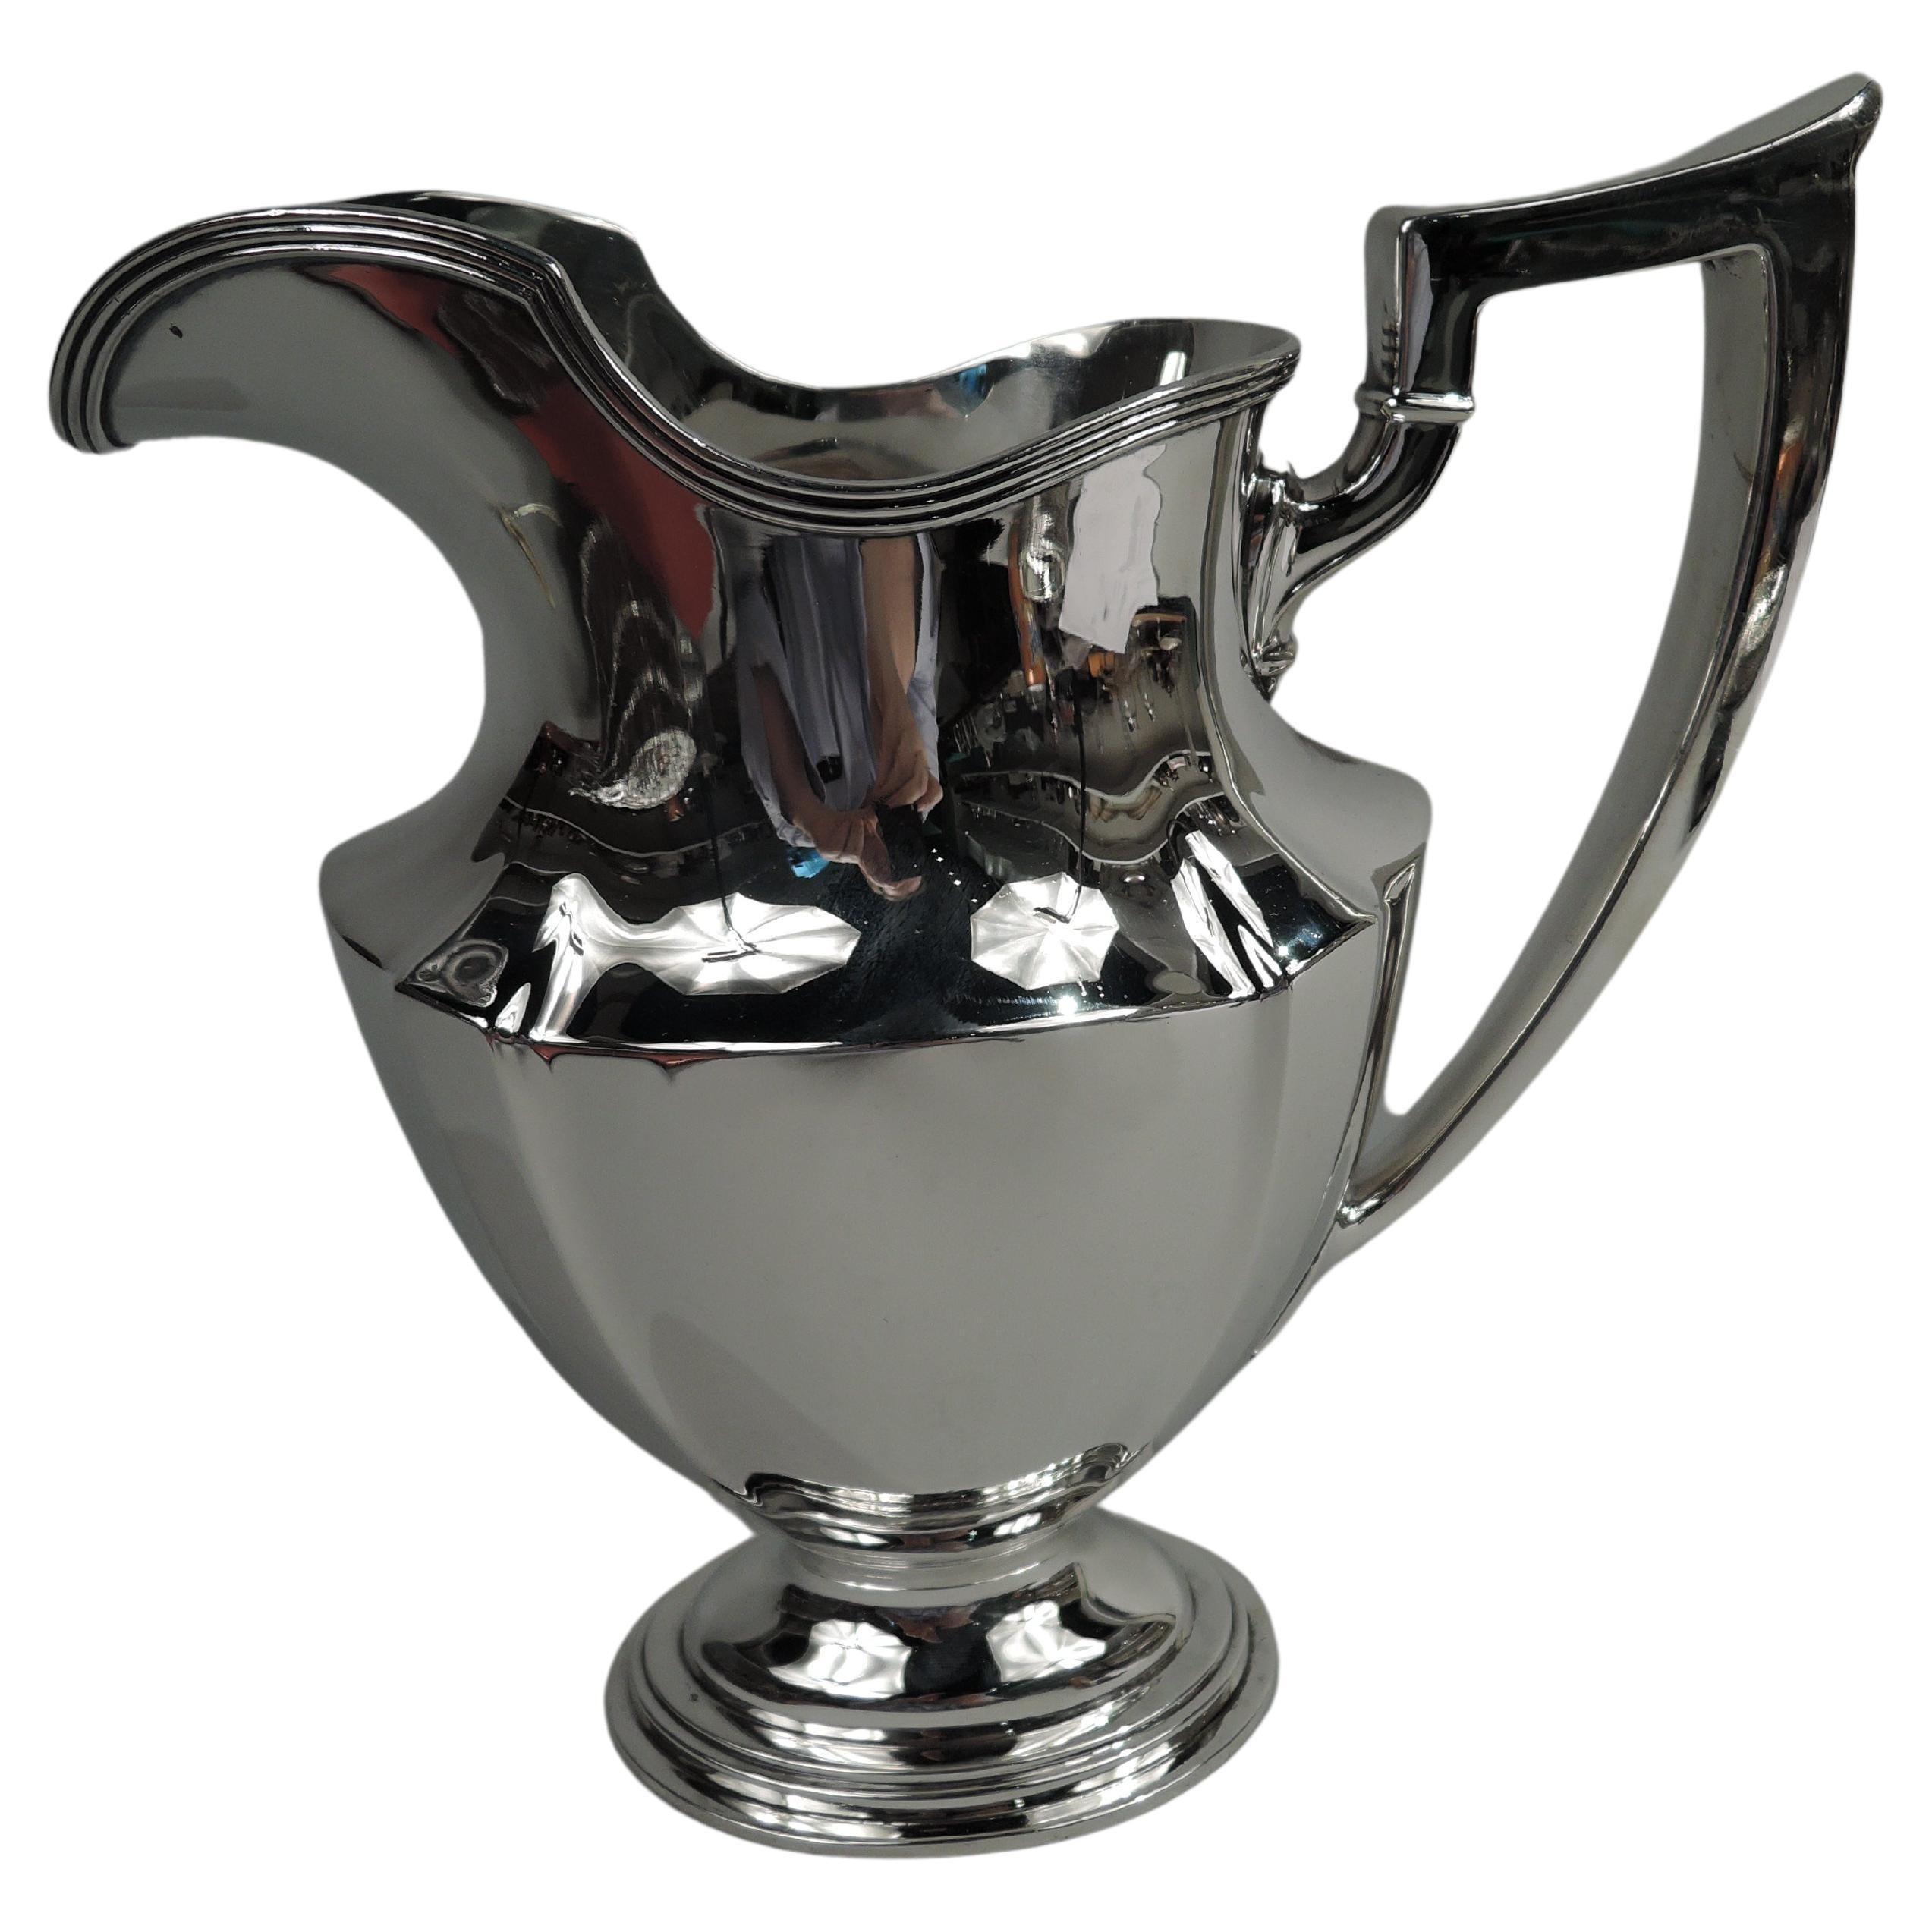 Gorham Plymouth Sterling Silver Water Pitcher, 1909